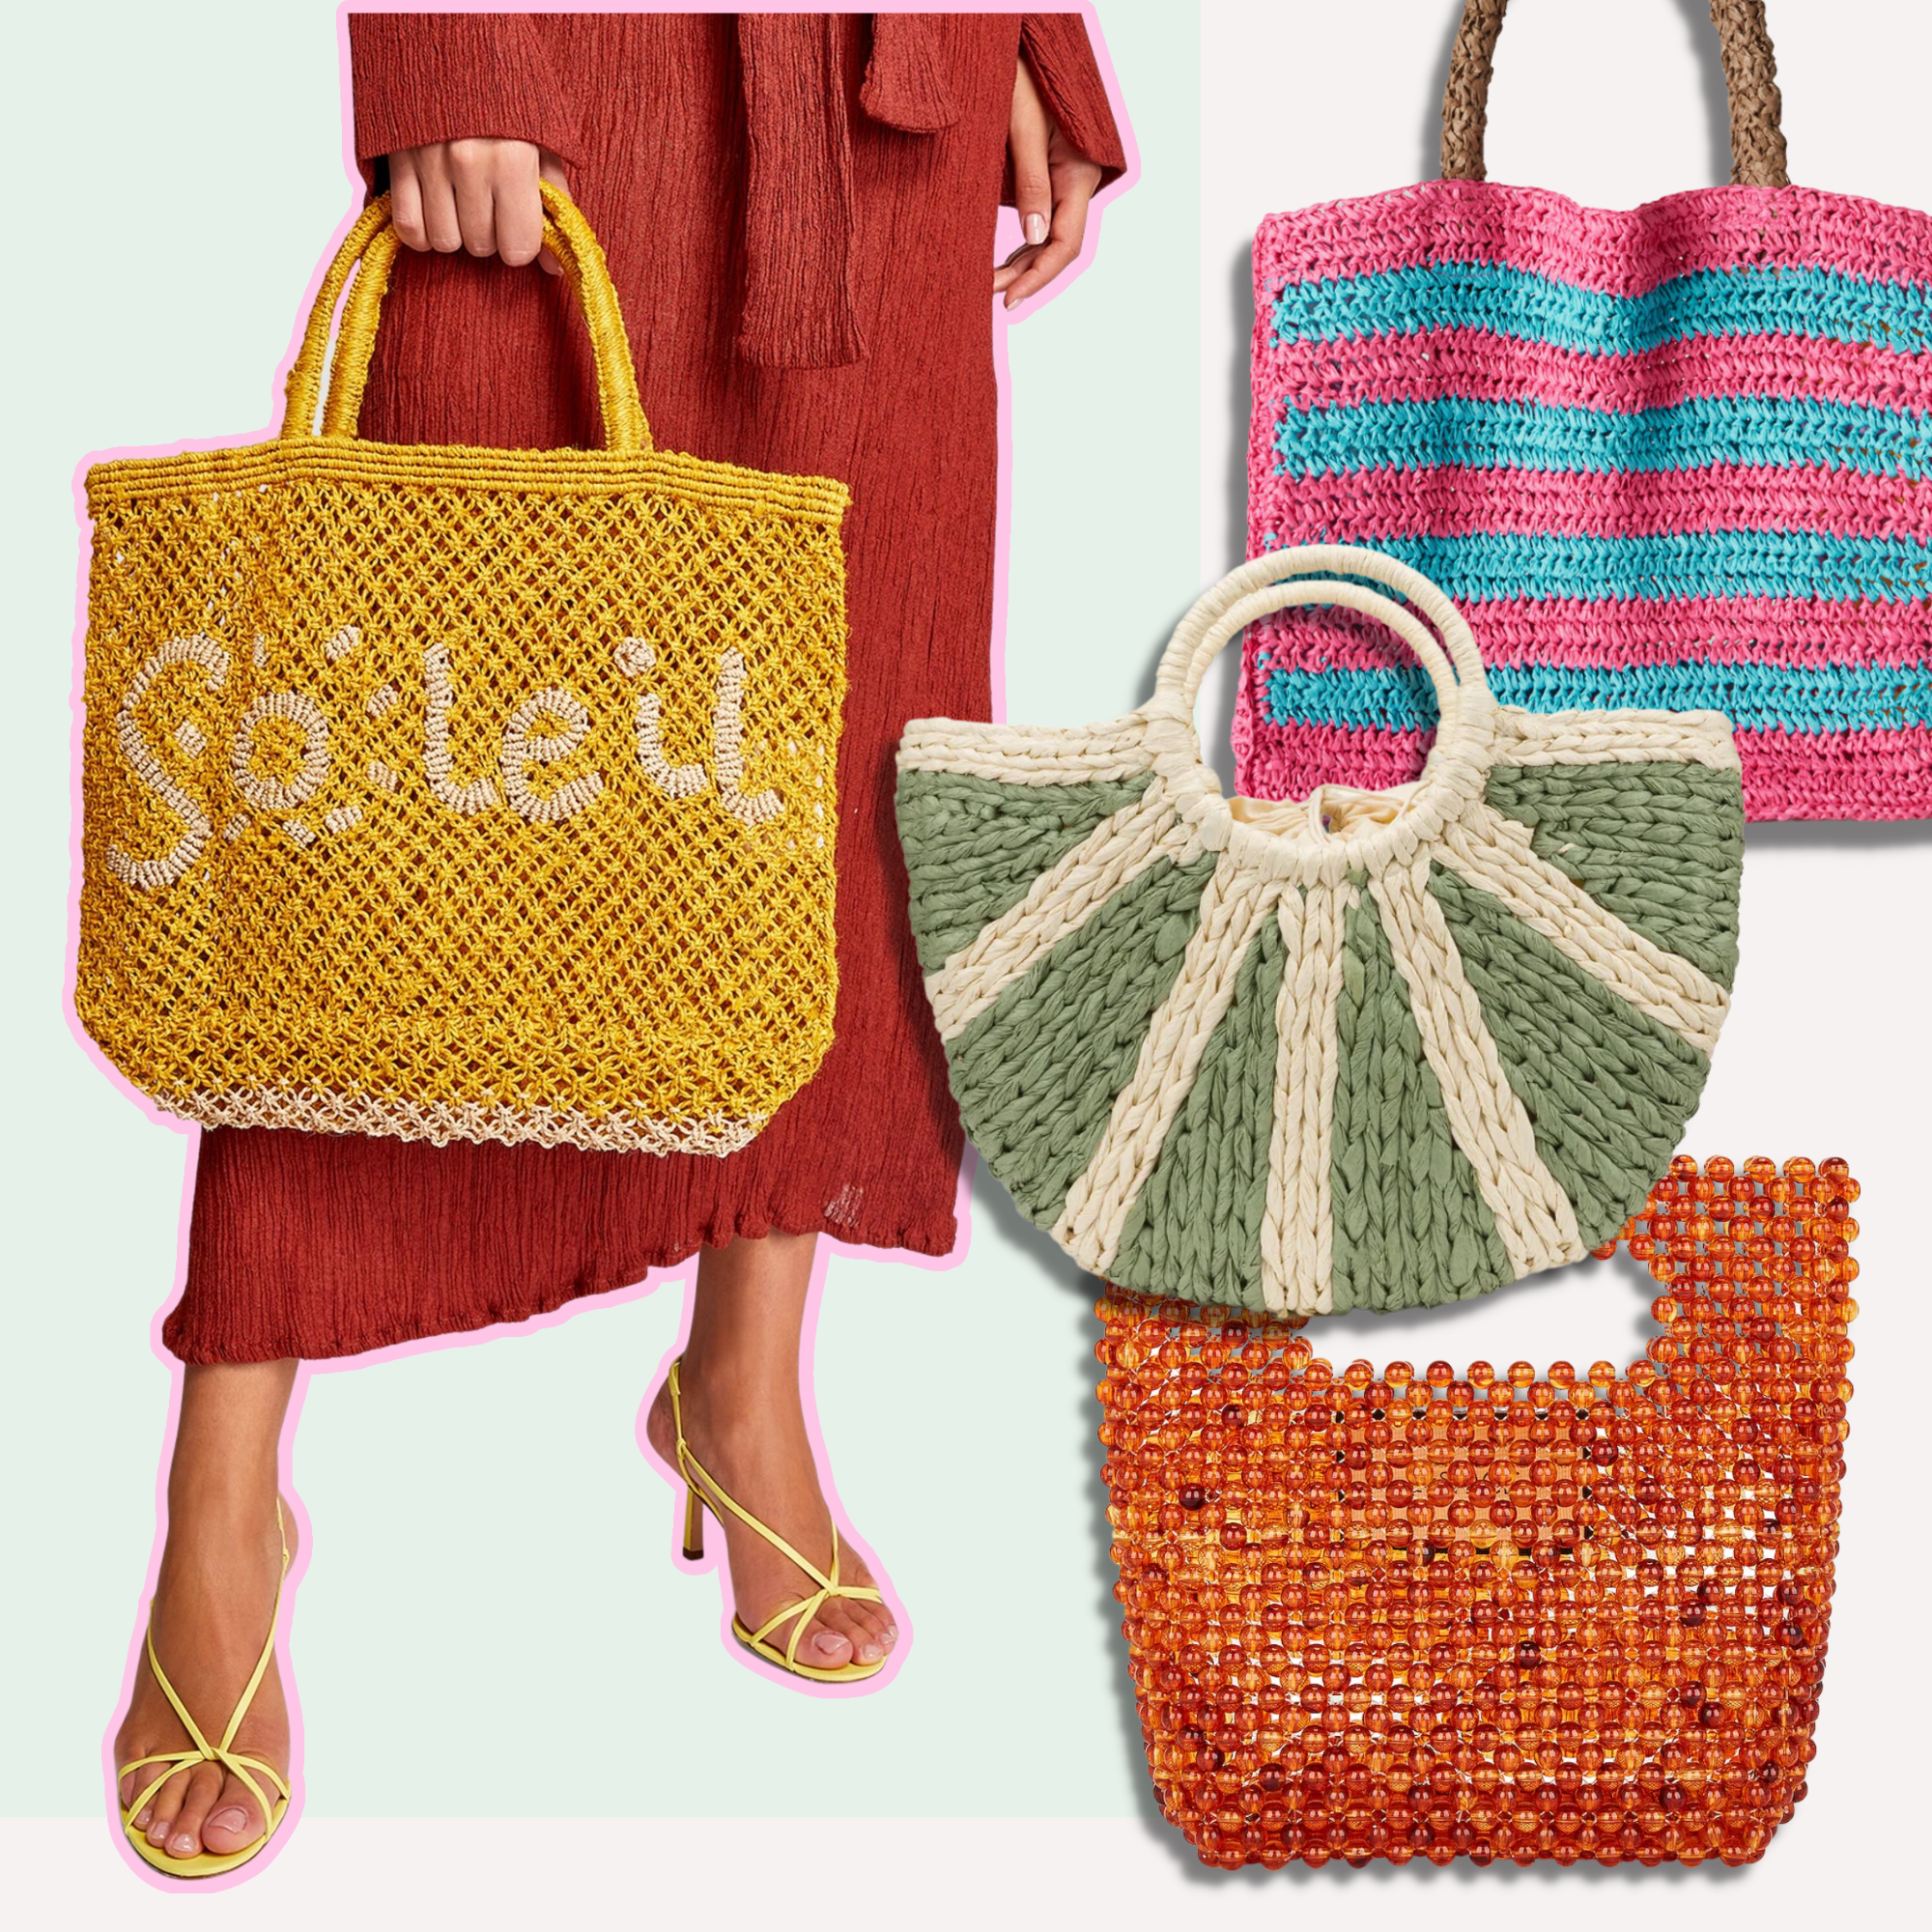 Get Ready For Summer 2023 With These 12 Must-Have Beach Bags — The